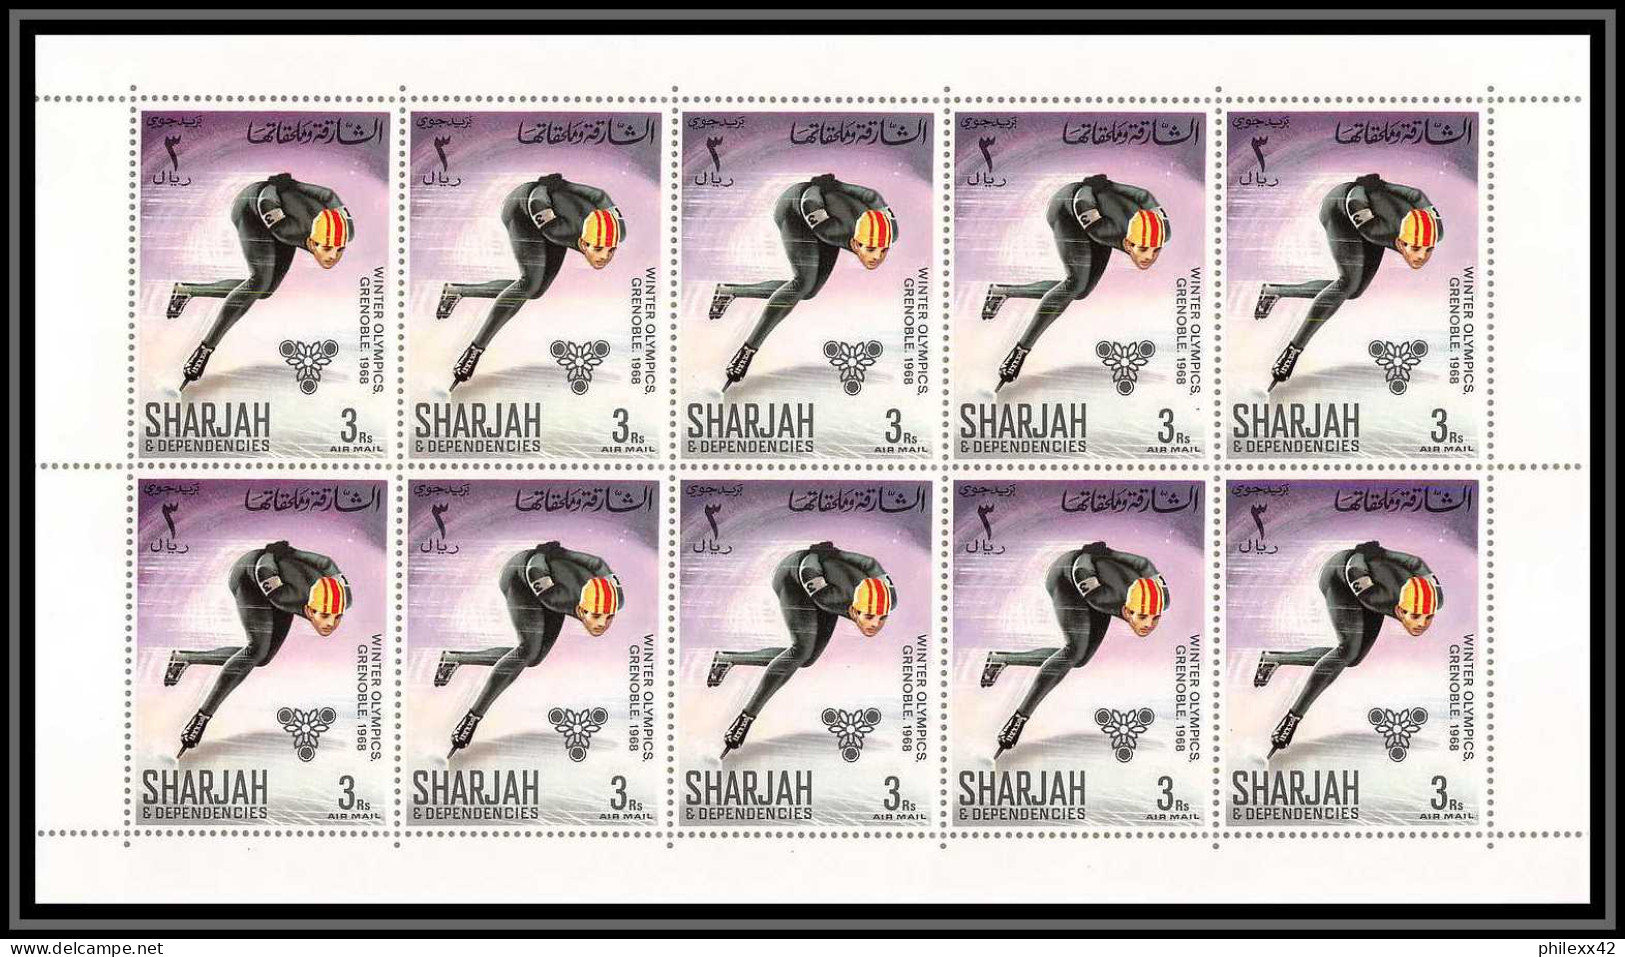 171b - Sharjah MNH ** N° 400 / 407 A Jeux Olympiques (winter Olympic Games) Grenoble 1968 Hockey Feuilles (sheets) - Sharjah